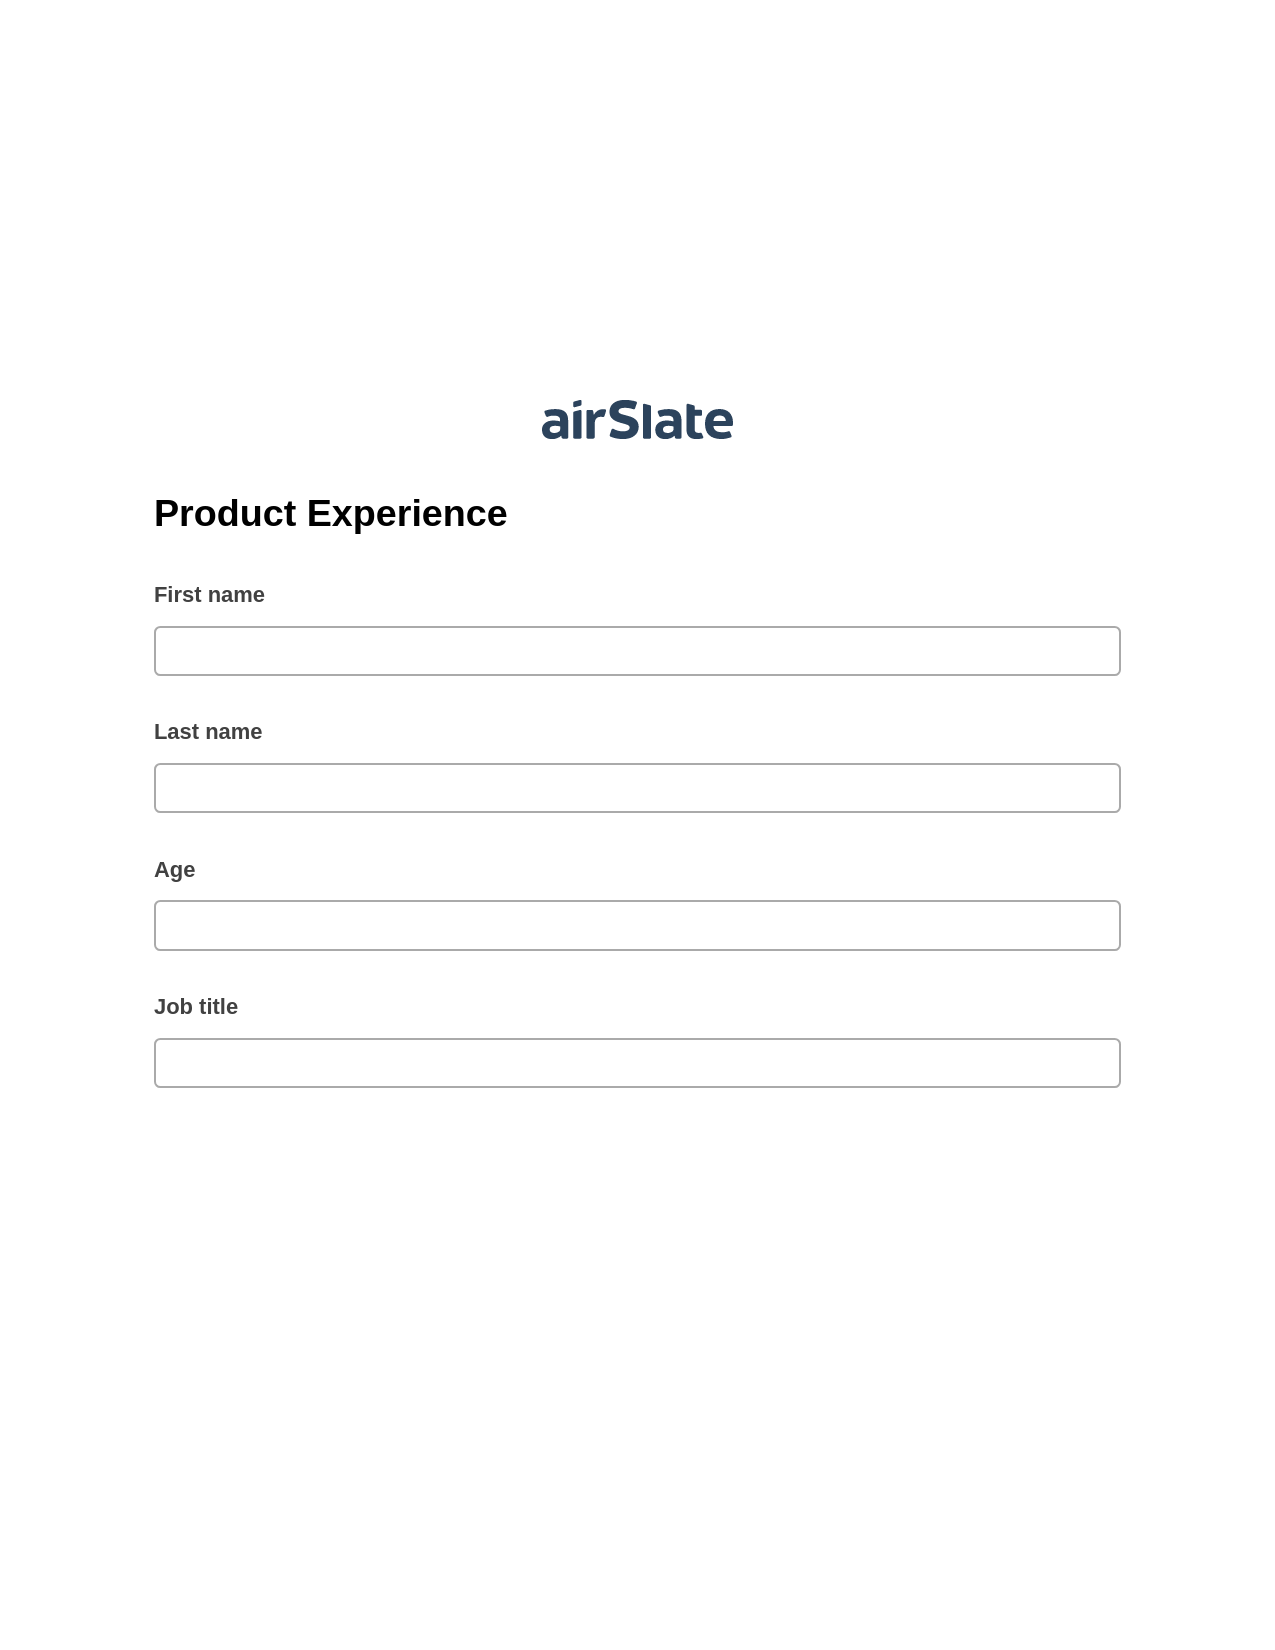 Product Experience Pre-fill from MySQL Bot, SendGrid send Campaign bot, Export to Excel 365 Bot